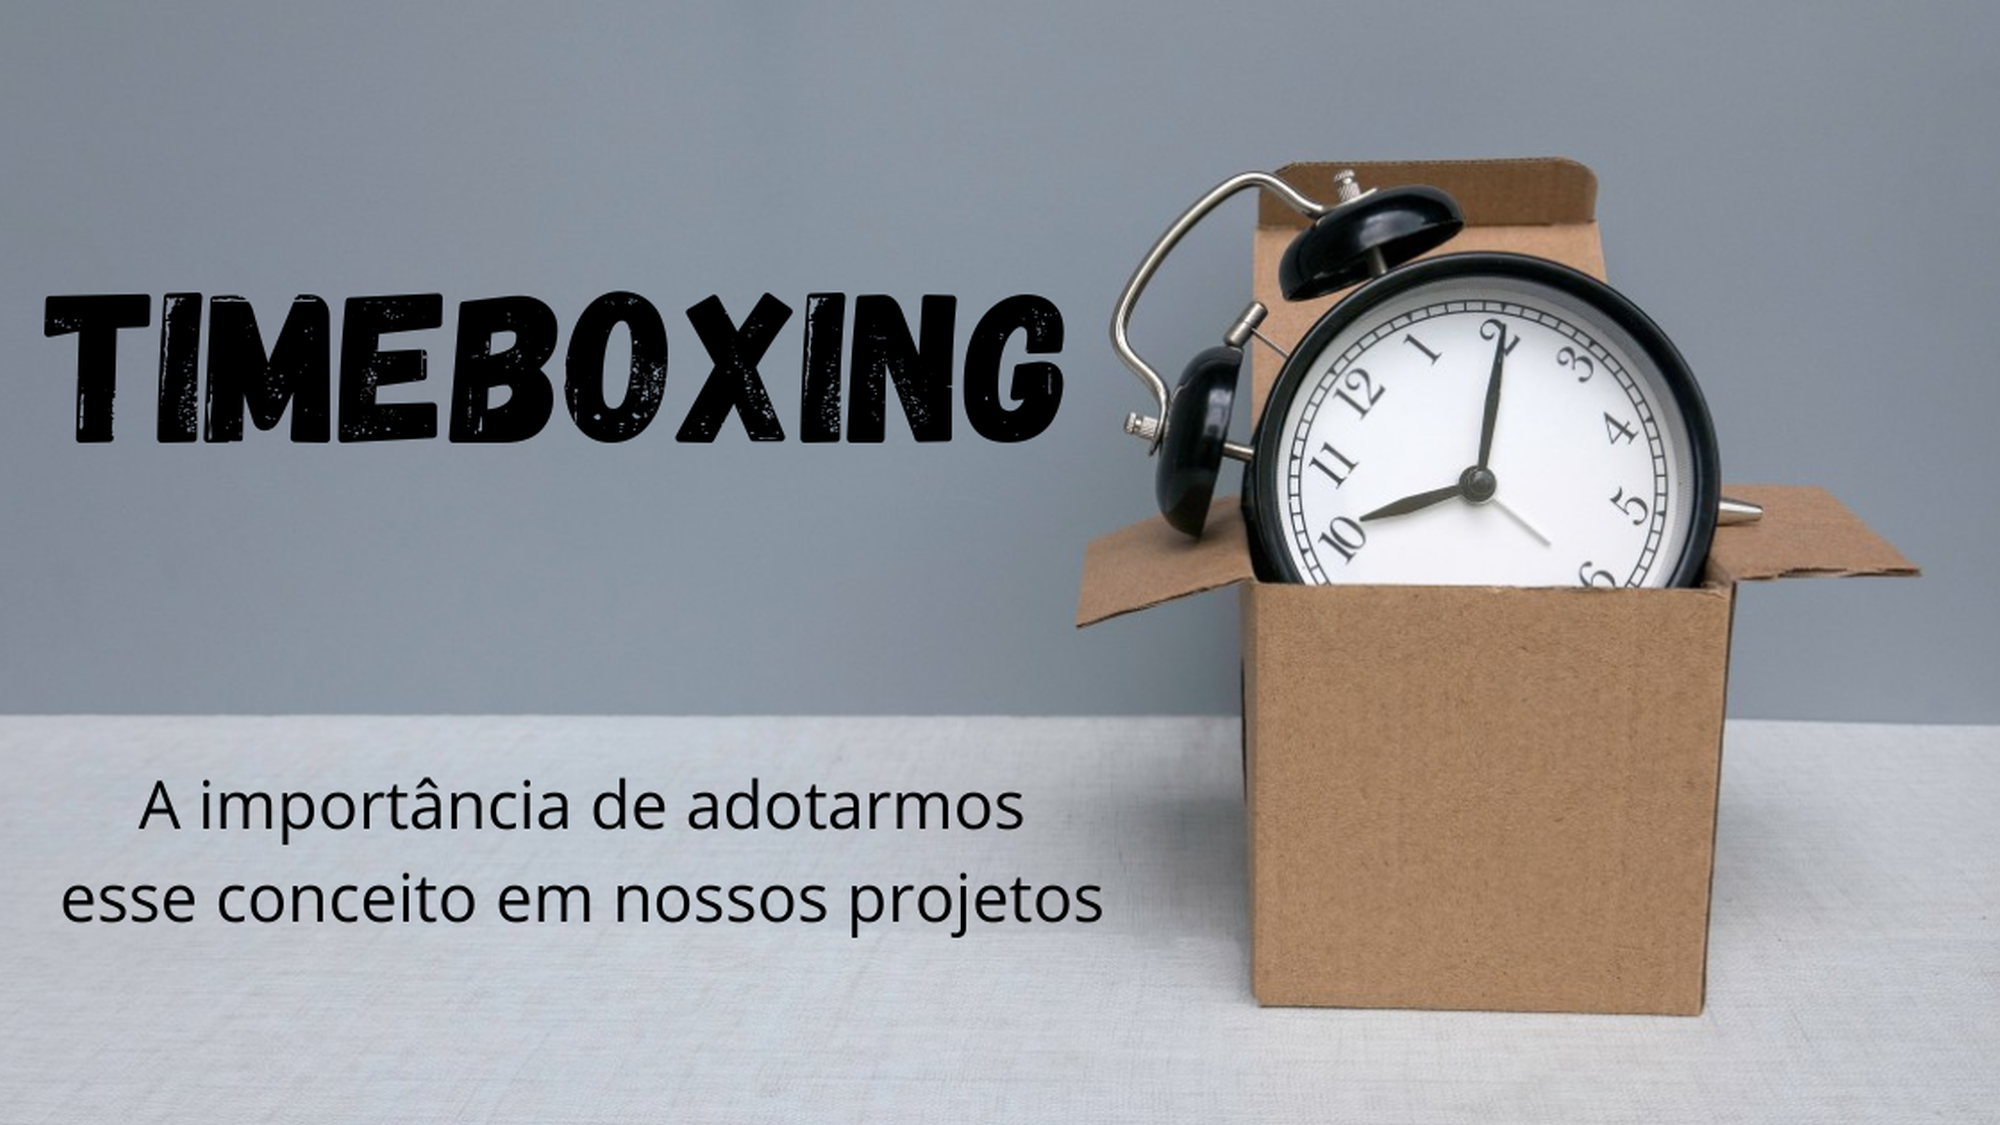 O Timeboxing